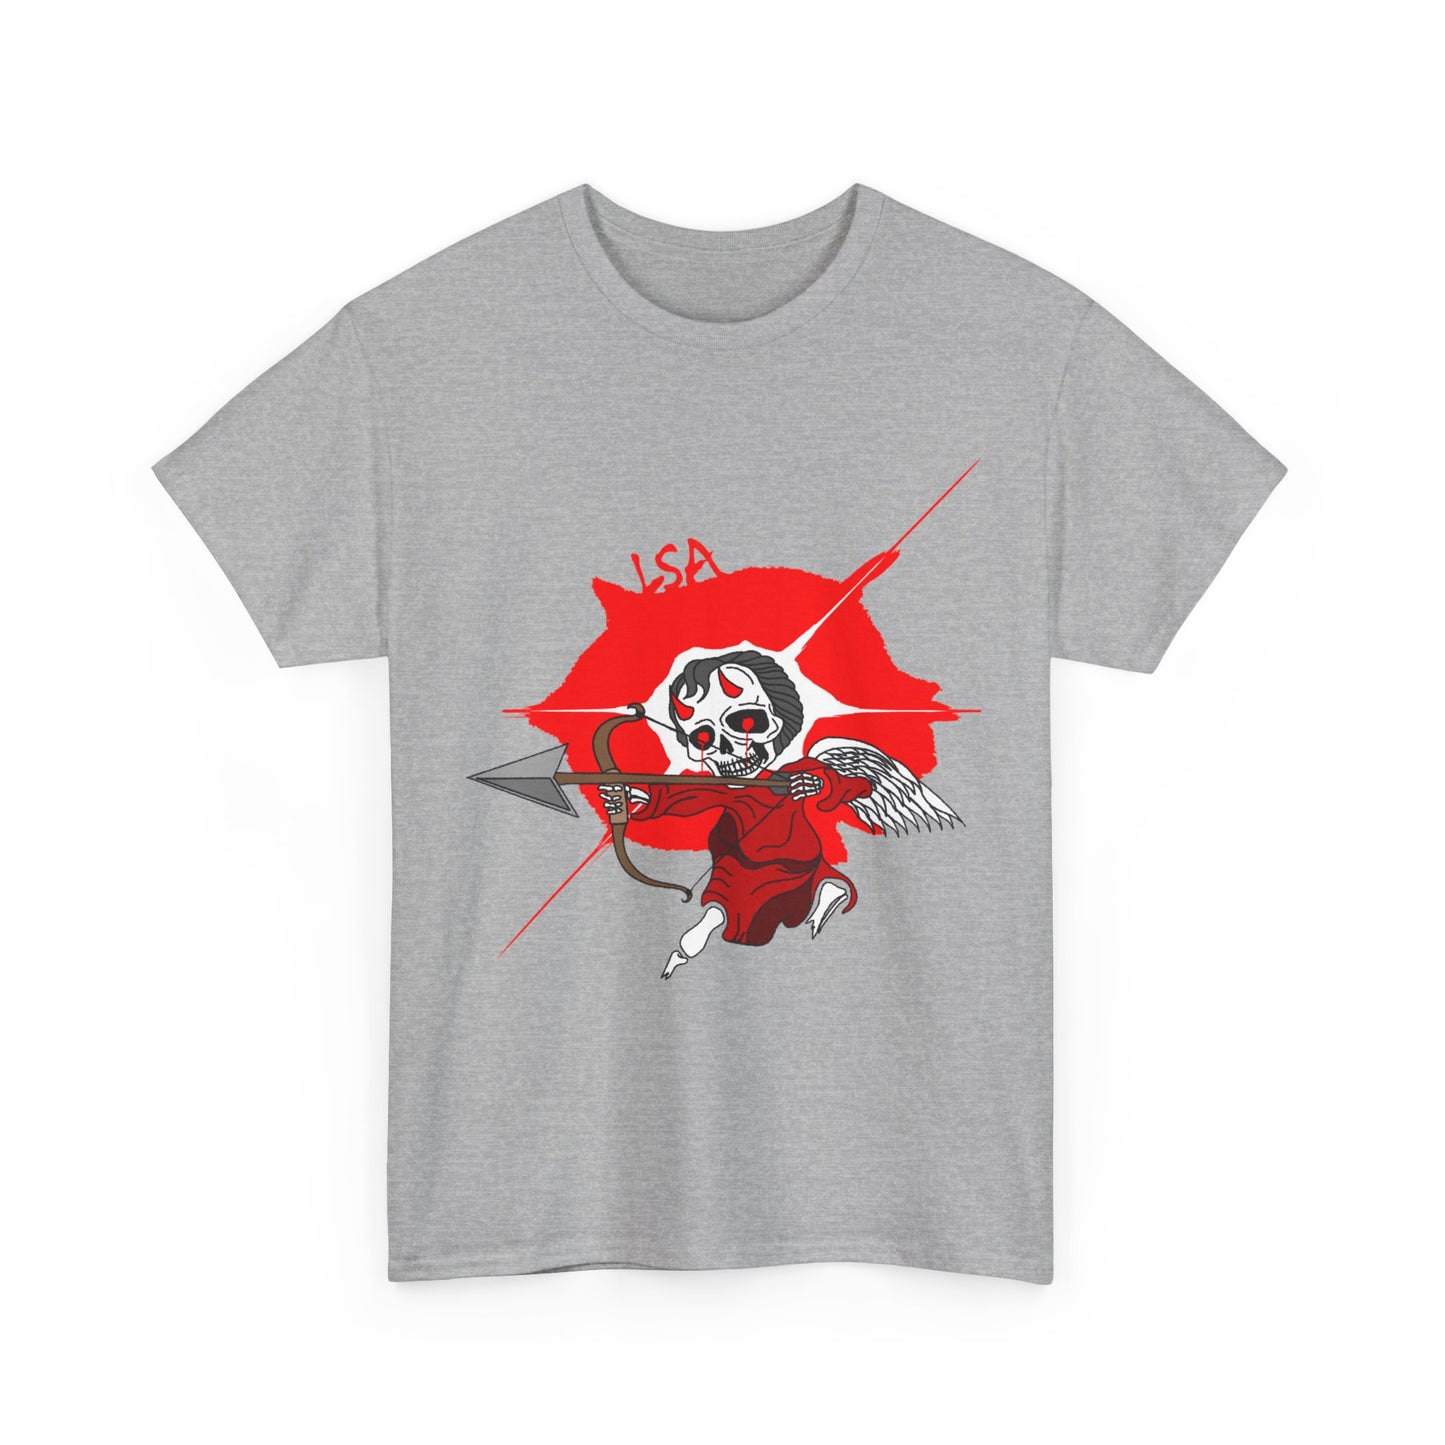 Cupid's Afterlife Tee